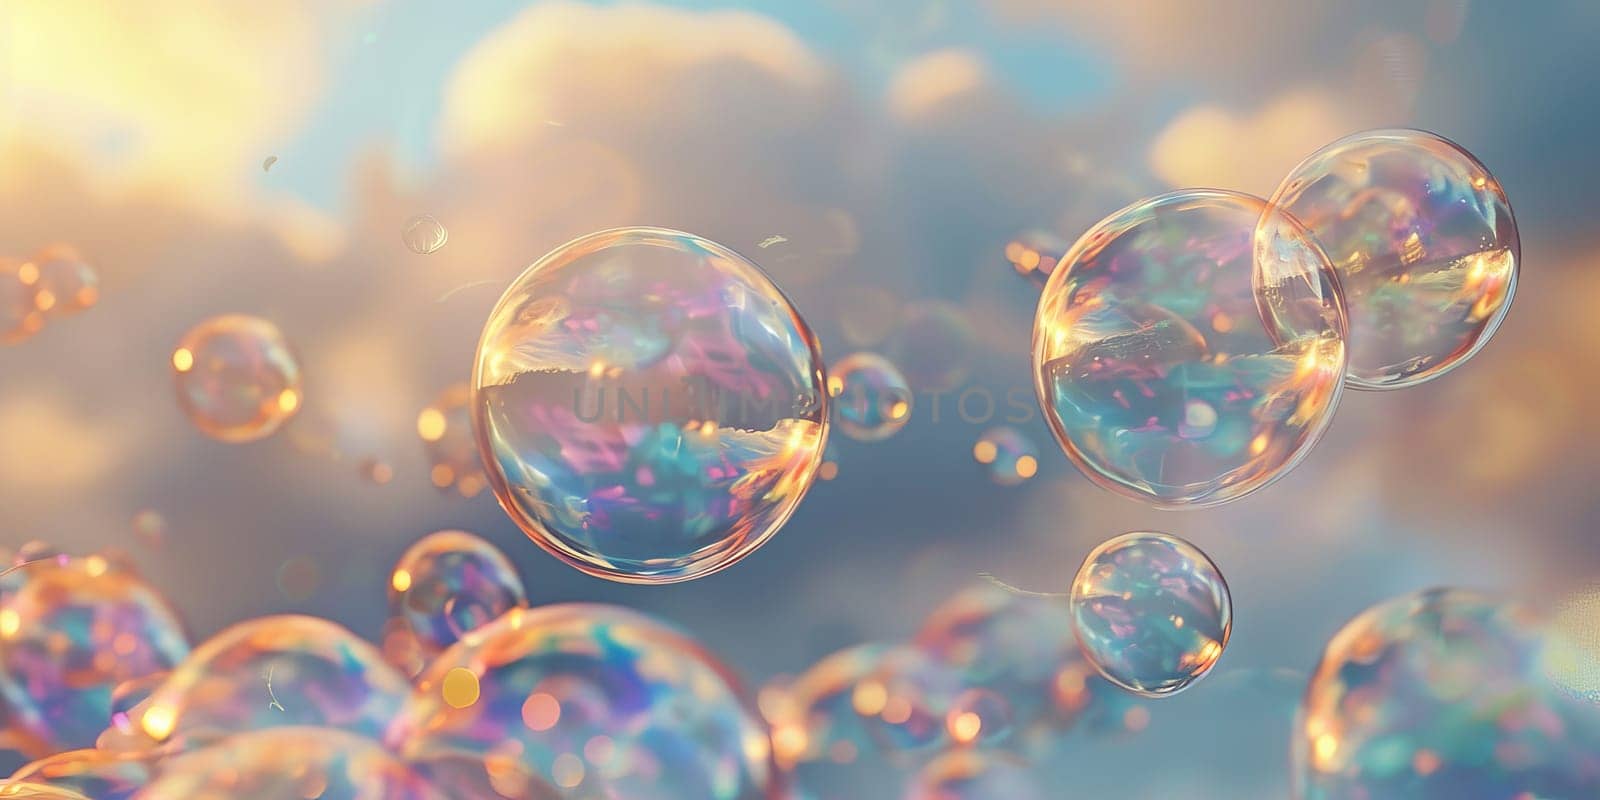 Soap bubbles float in the air on sunny day